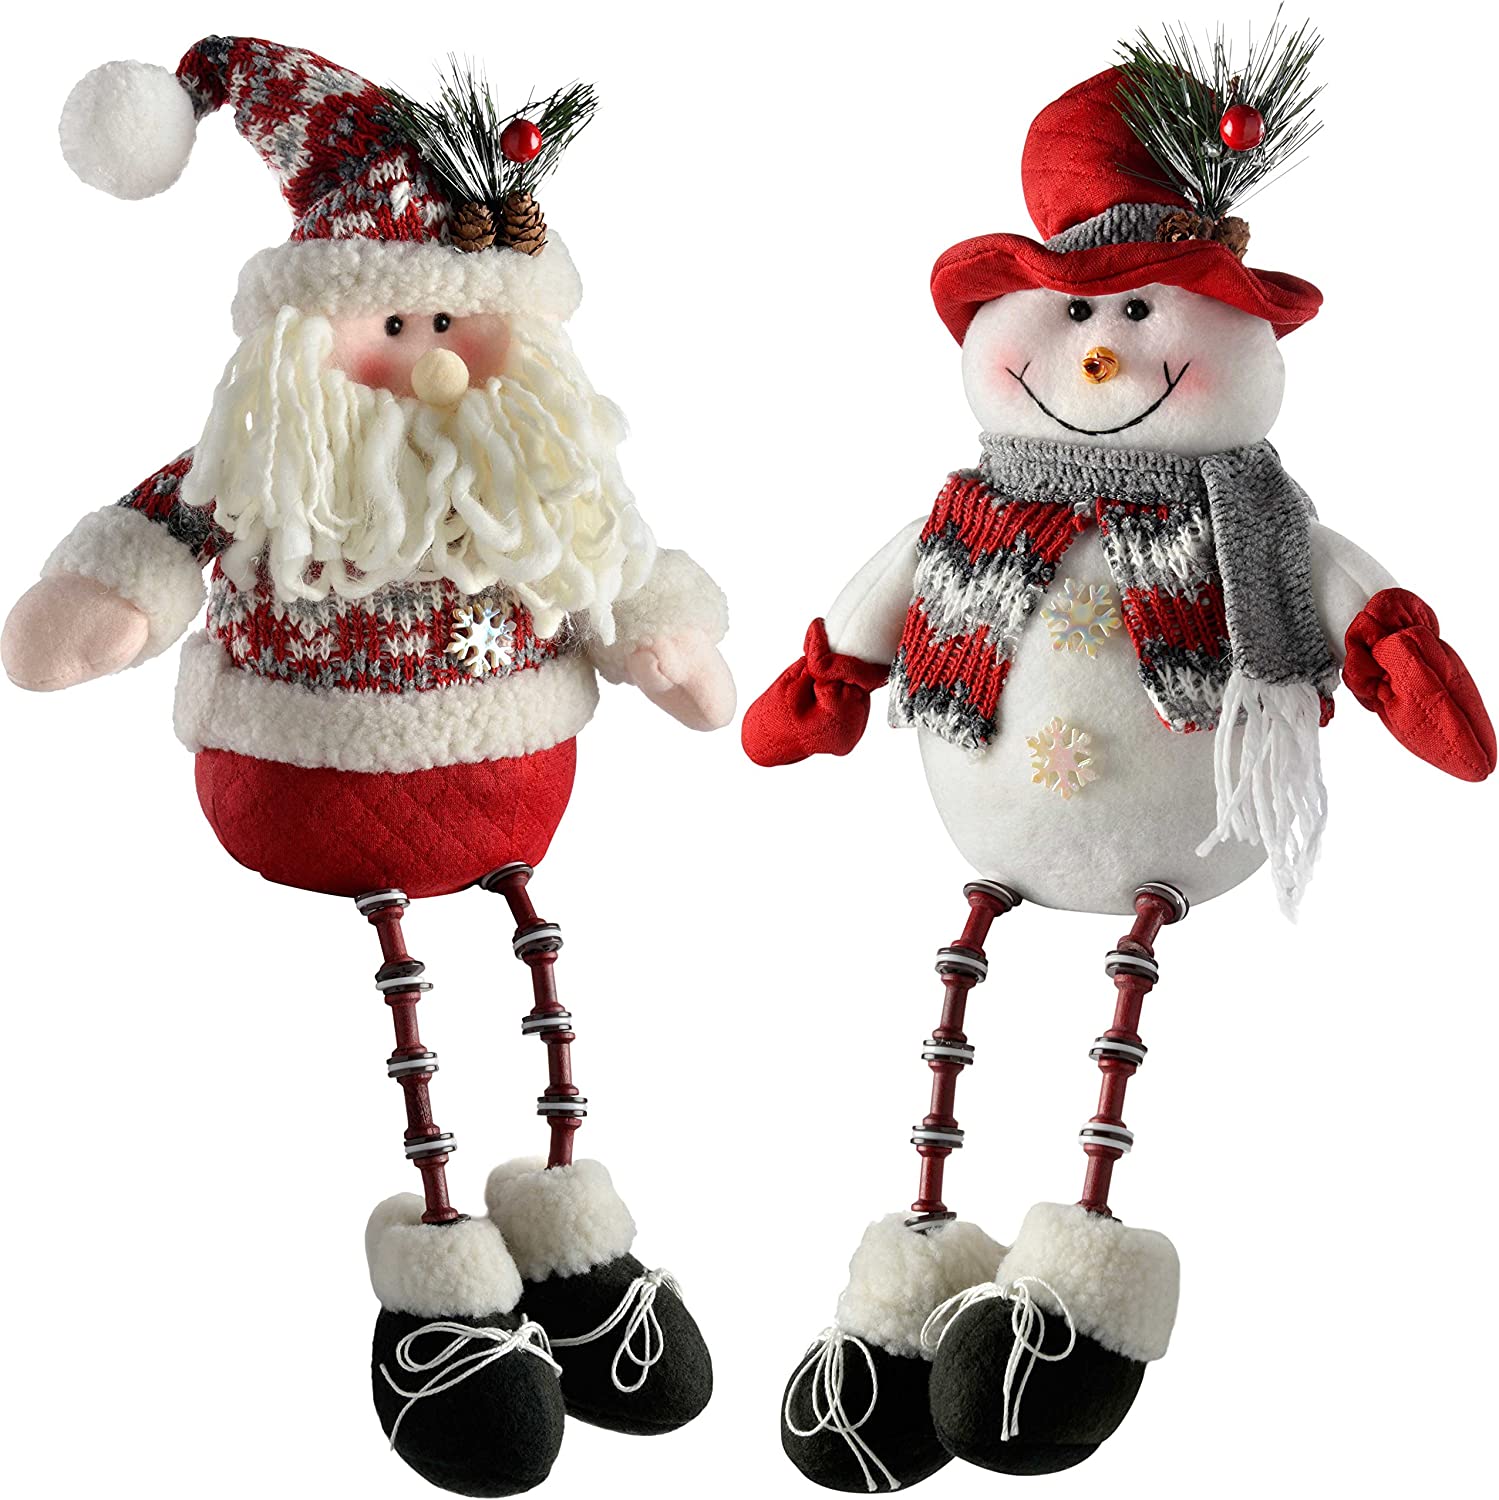 WeRChristmas 41 cm Sitting with Button Legs Santa Snowman Christmas Tree Decorations – Red/Grey, Set of 2